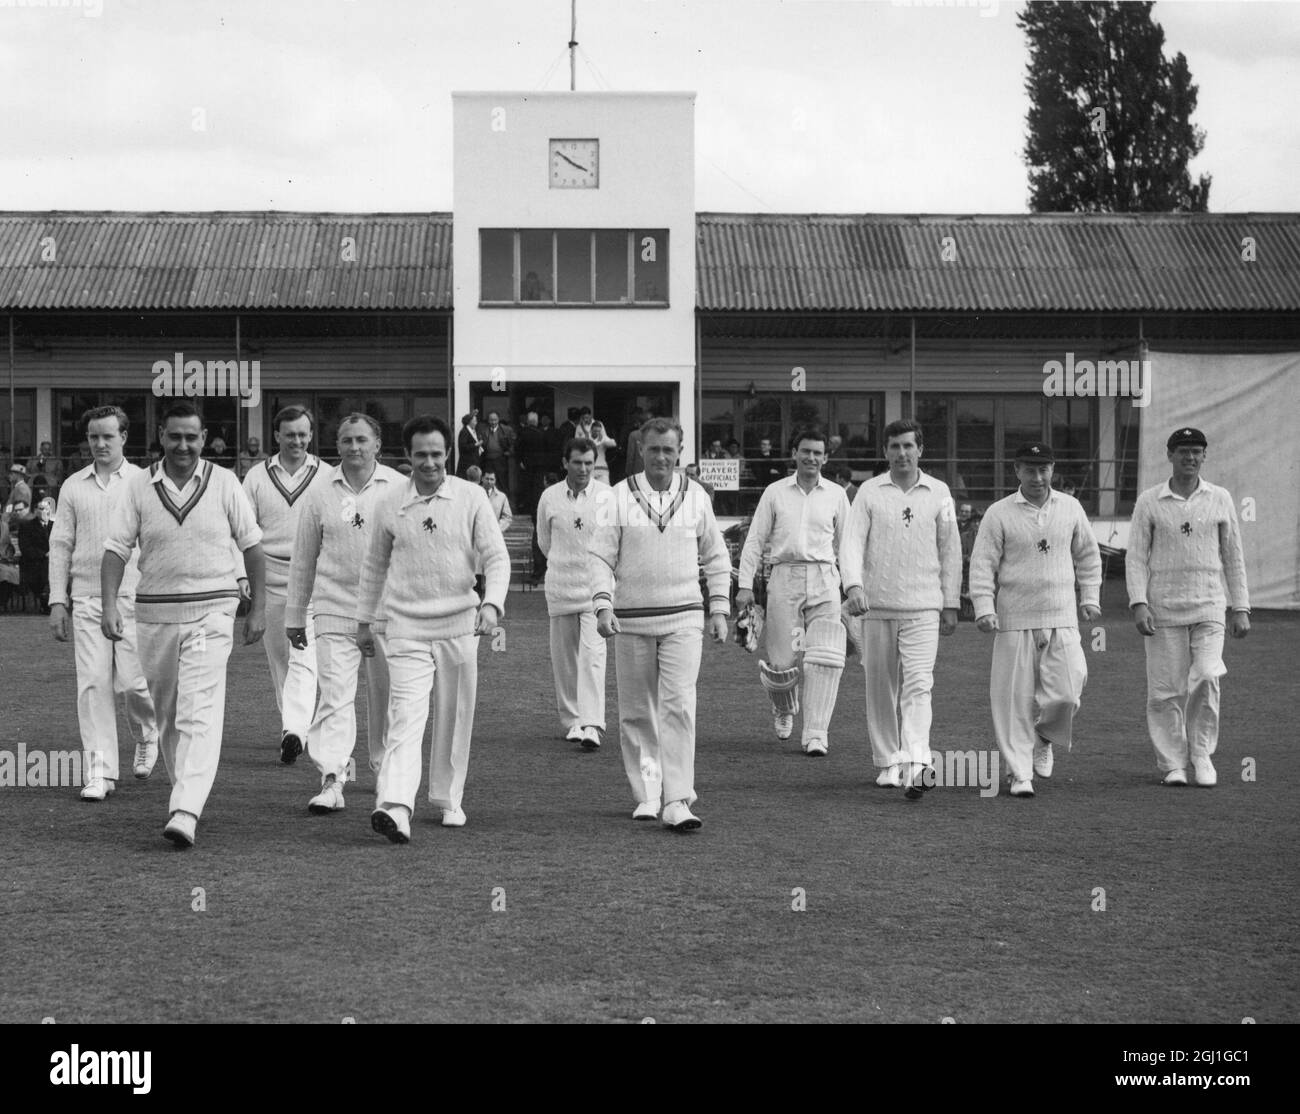 Local Cricketer makes county debut John Dye of Frindsbury Cricket Club is on the extreme left behind captain Colin Cowdrey as the team takes the field at Hesketh Park Dartford in the match Kent Vs Gloucestershire 1962 Stock Photo